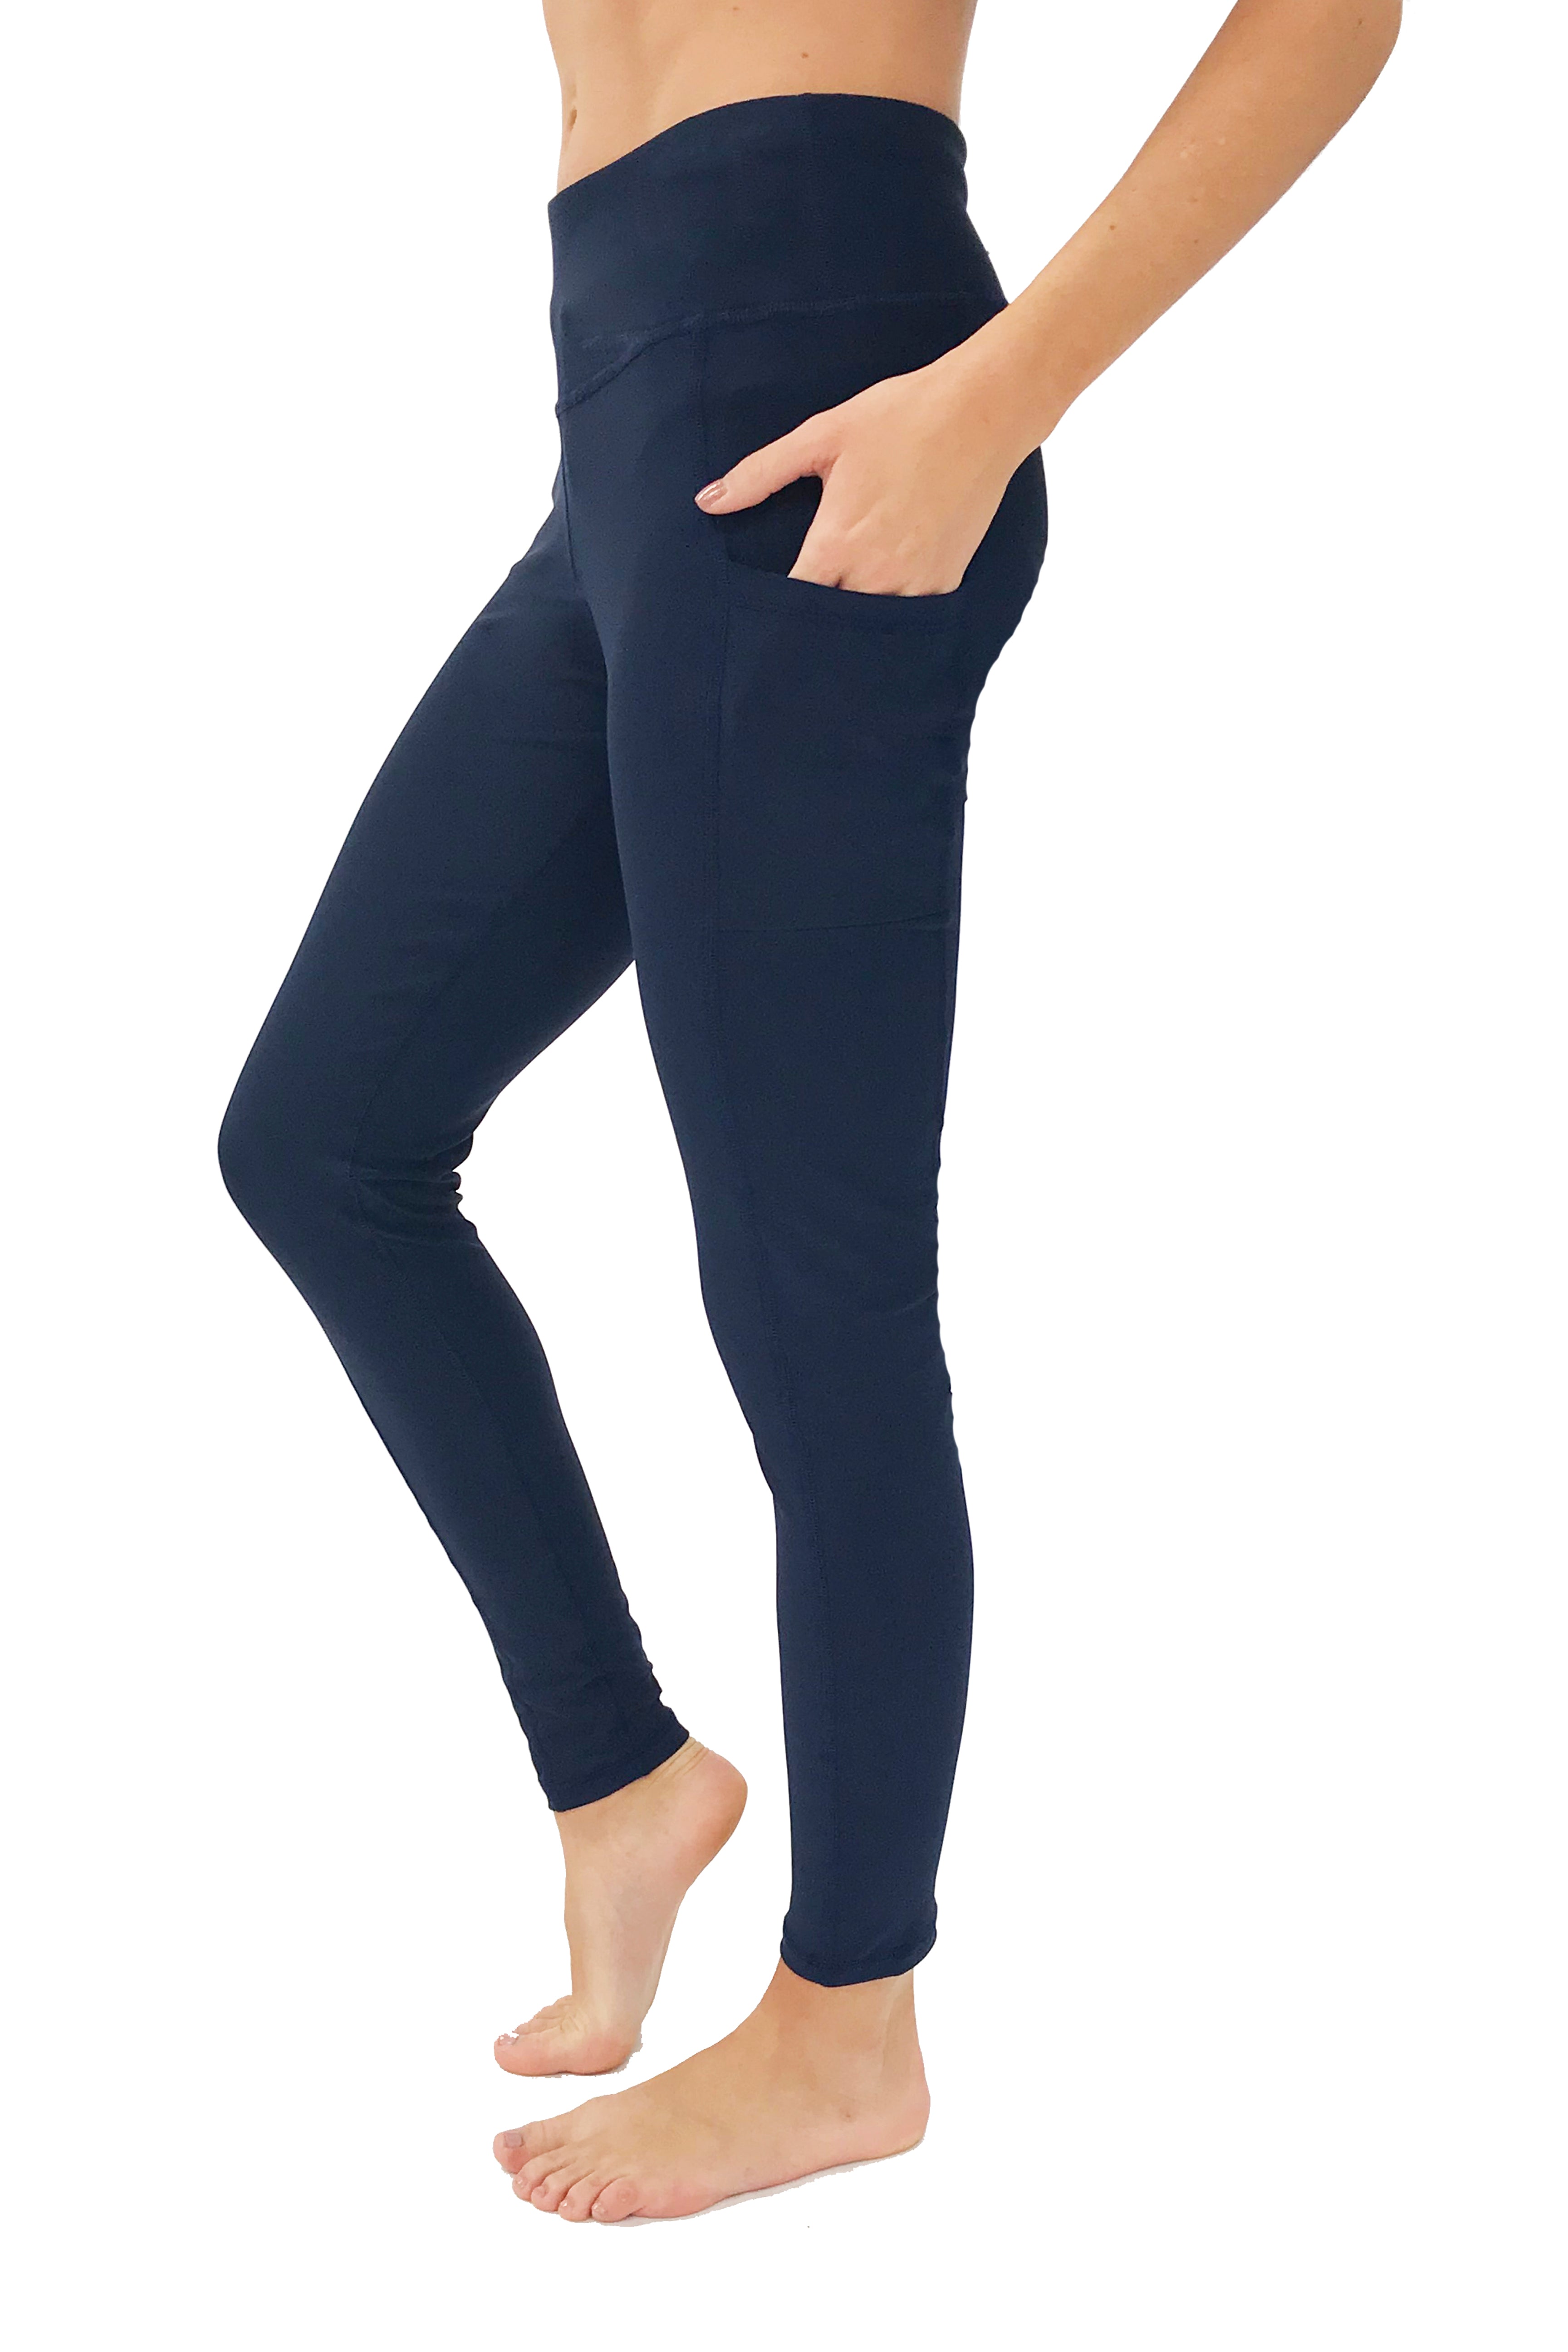 Leggings With Pockets For Phone